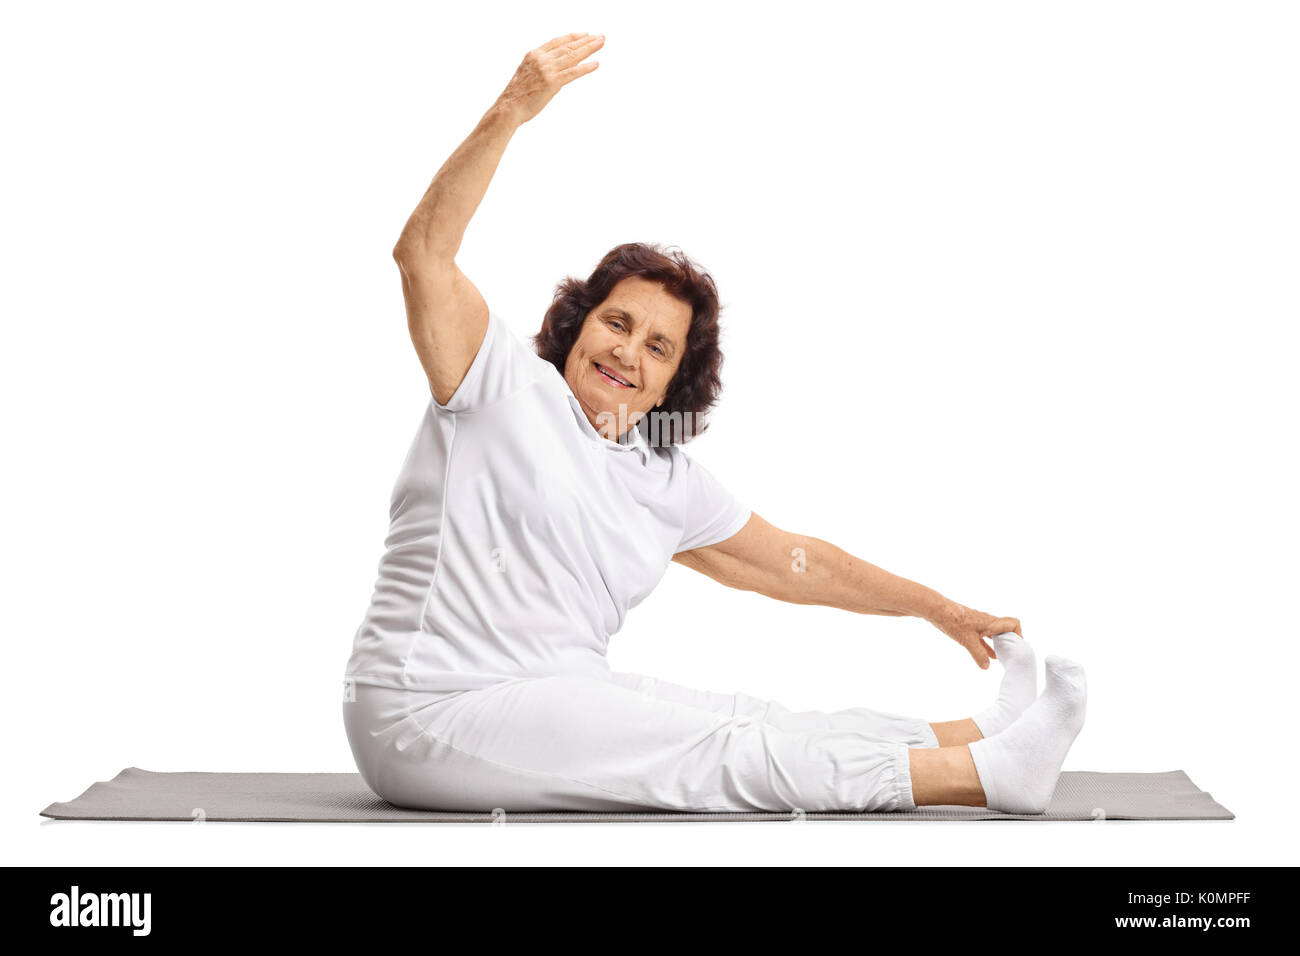 Elderly woman exercising on a mat isolated on white background Stock Photo